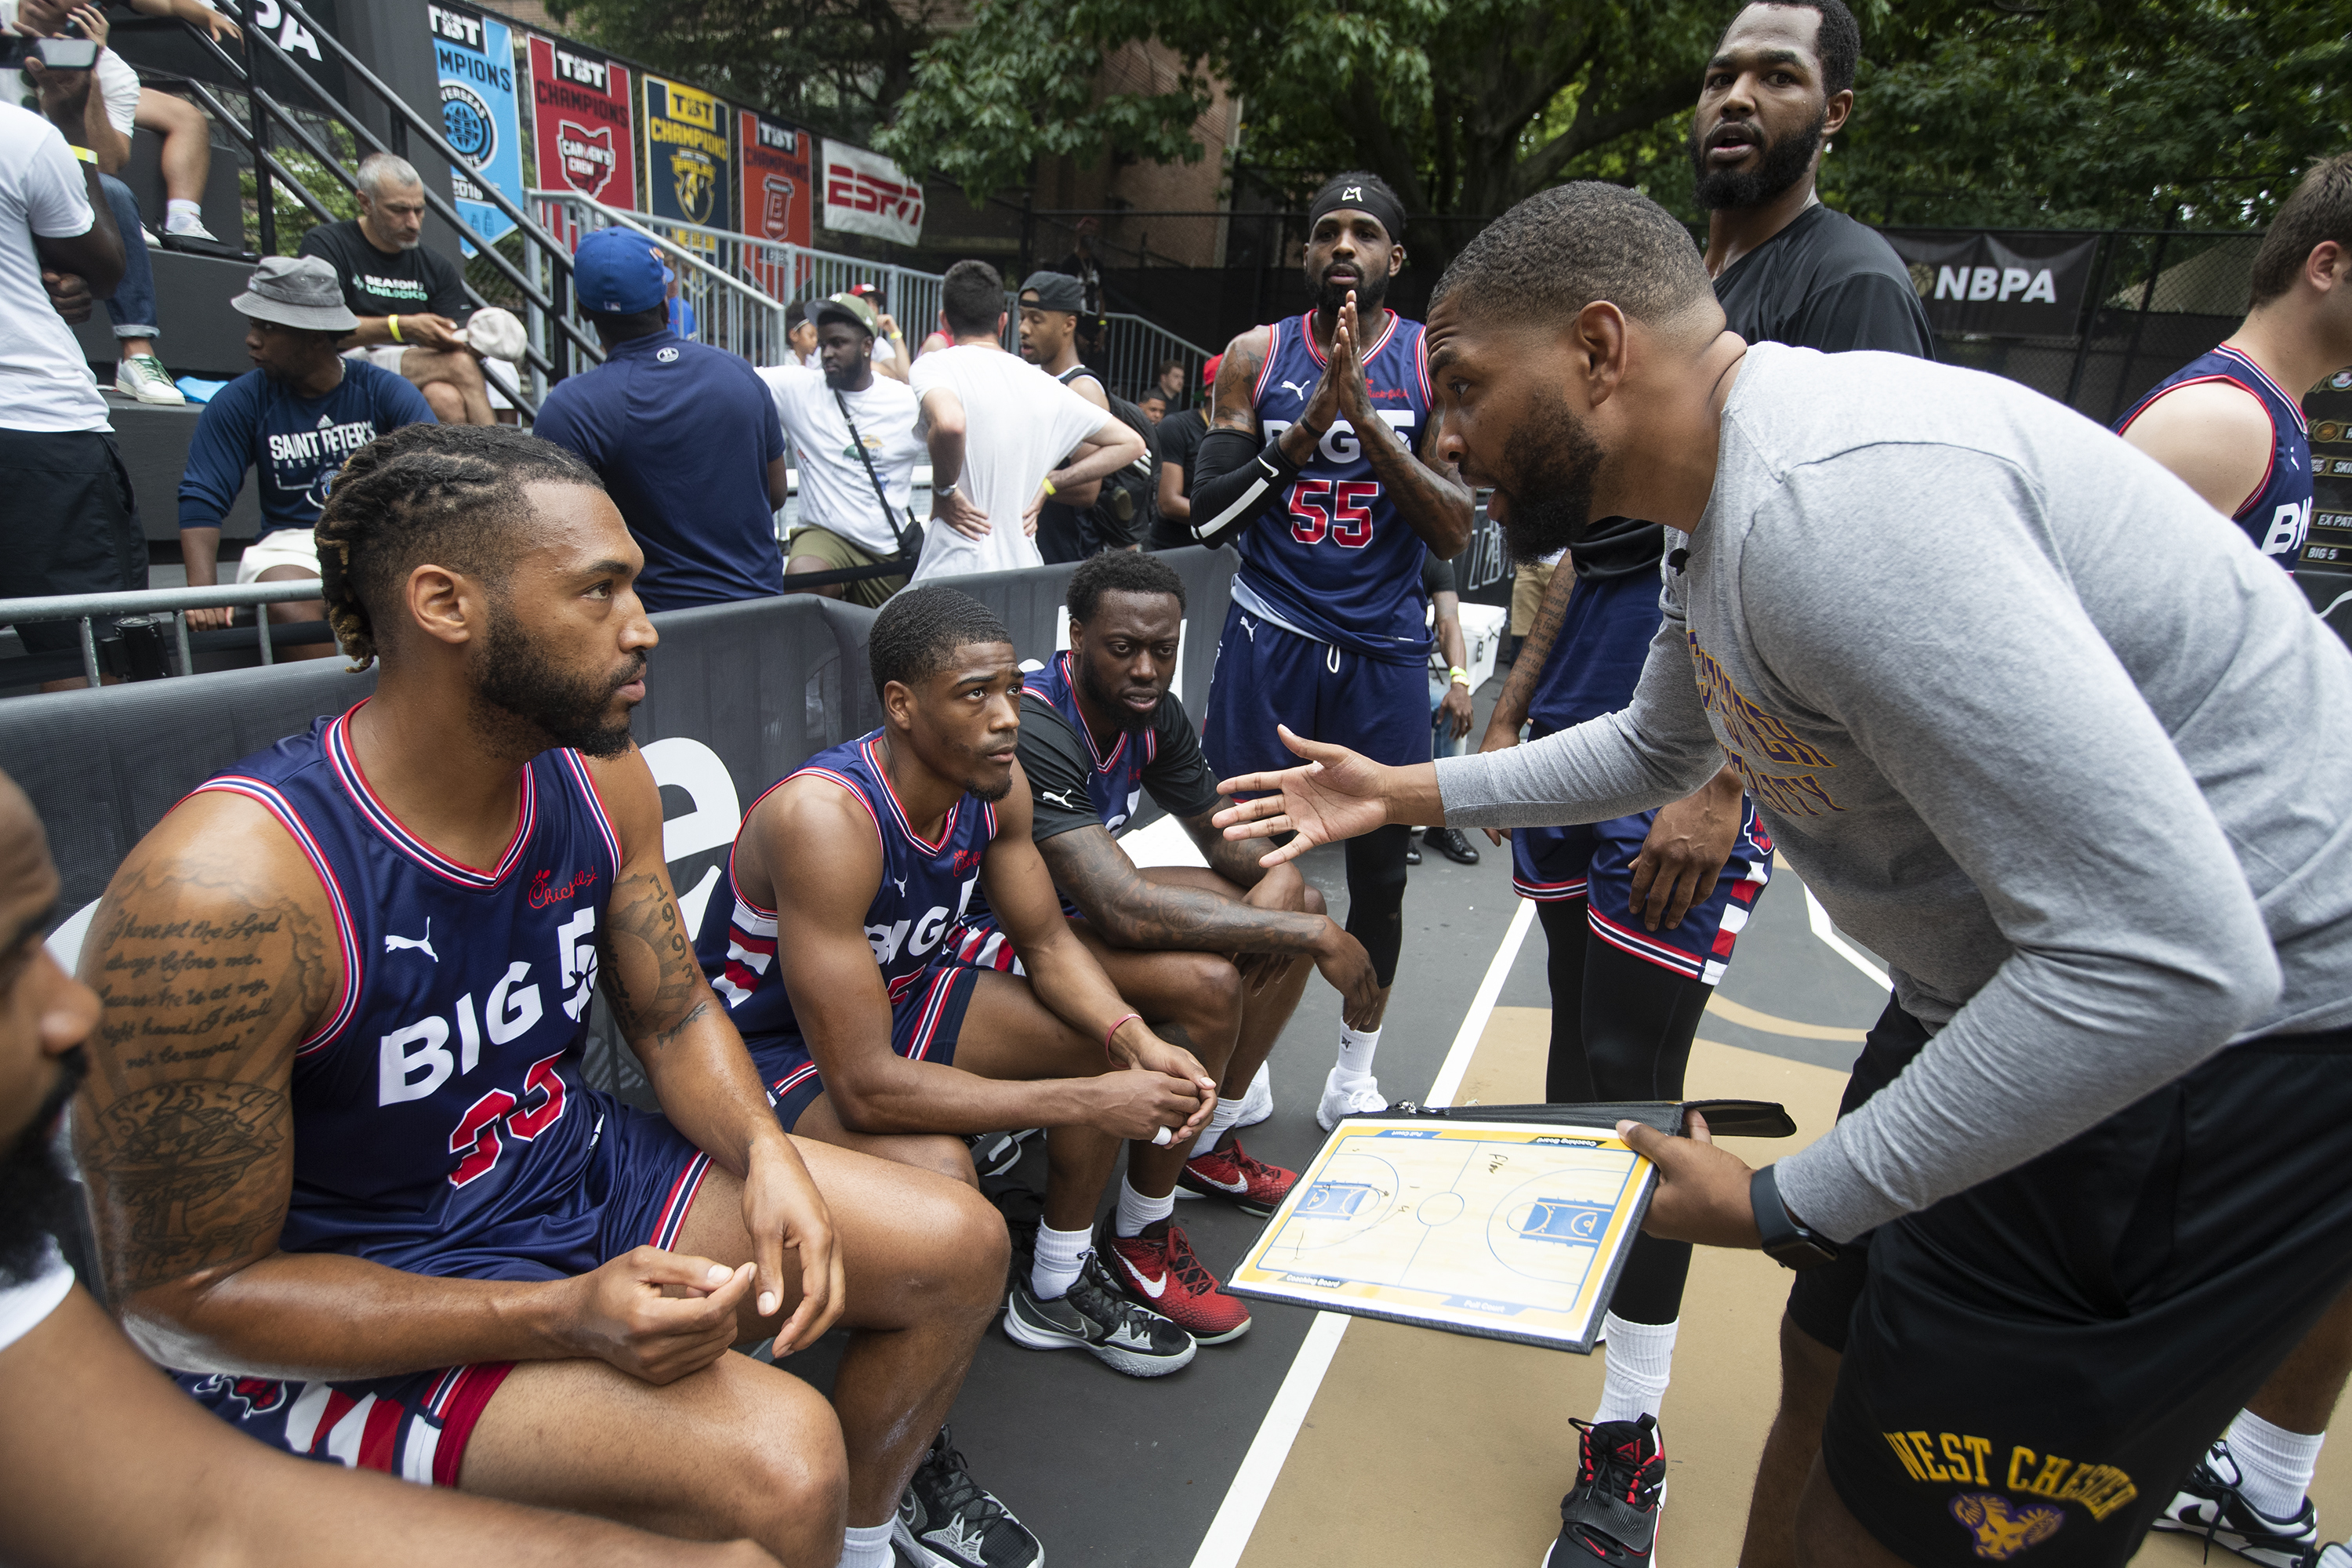 Rained out at New York's Rucker Park, Big 5 alumni win resumed game in  Bronx gym